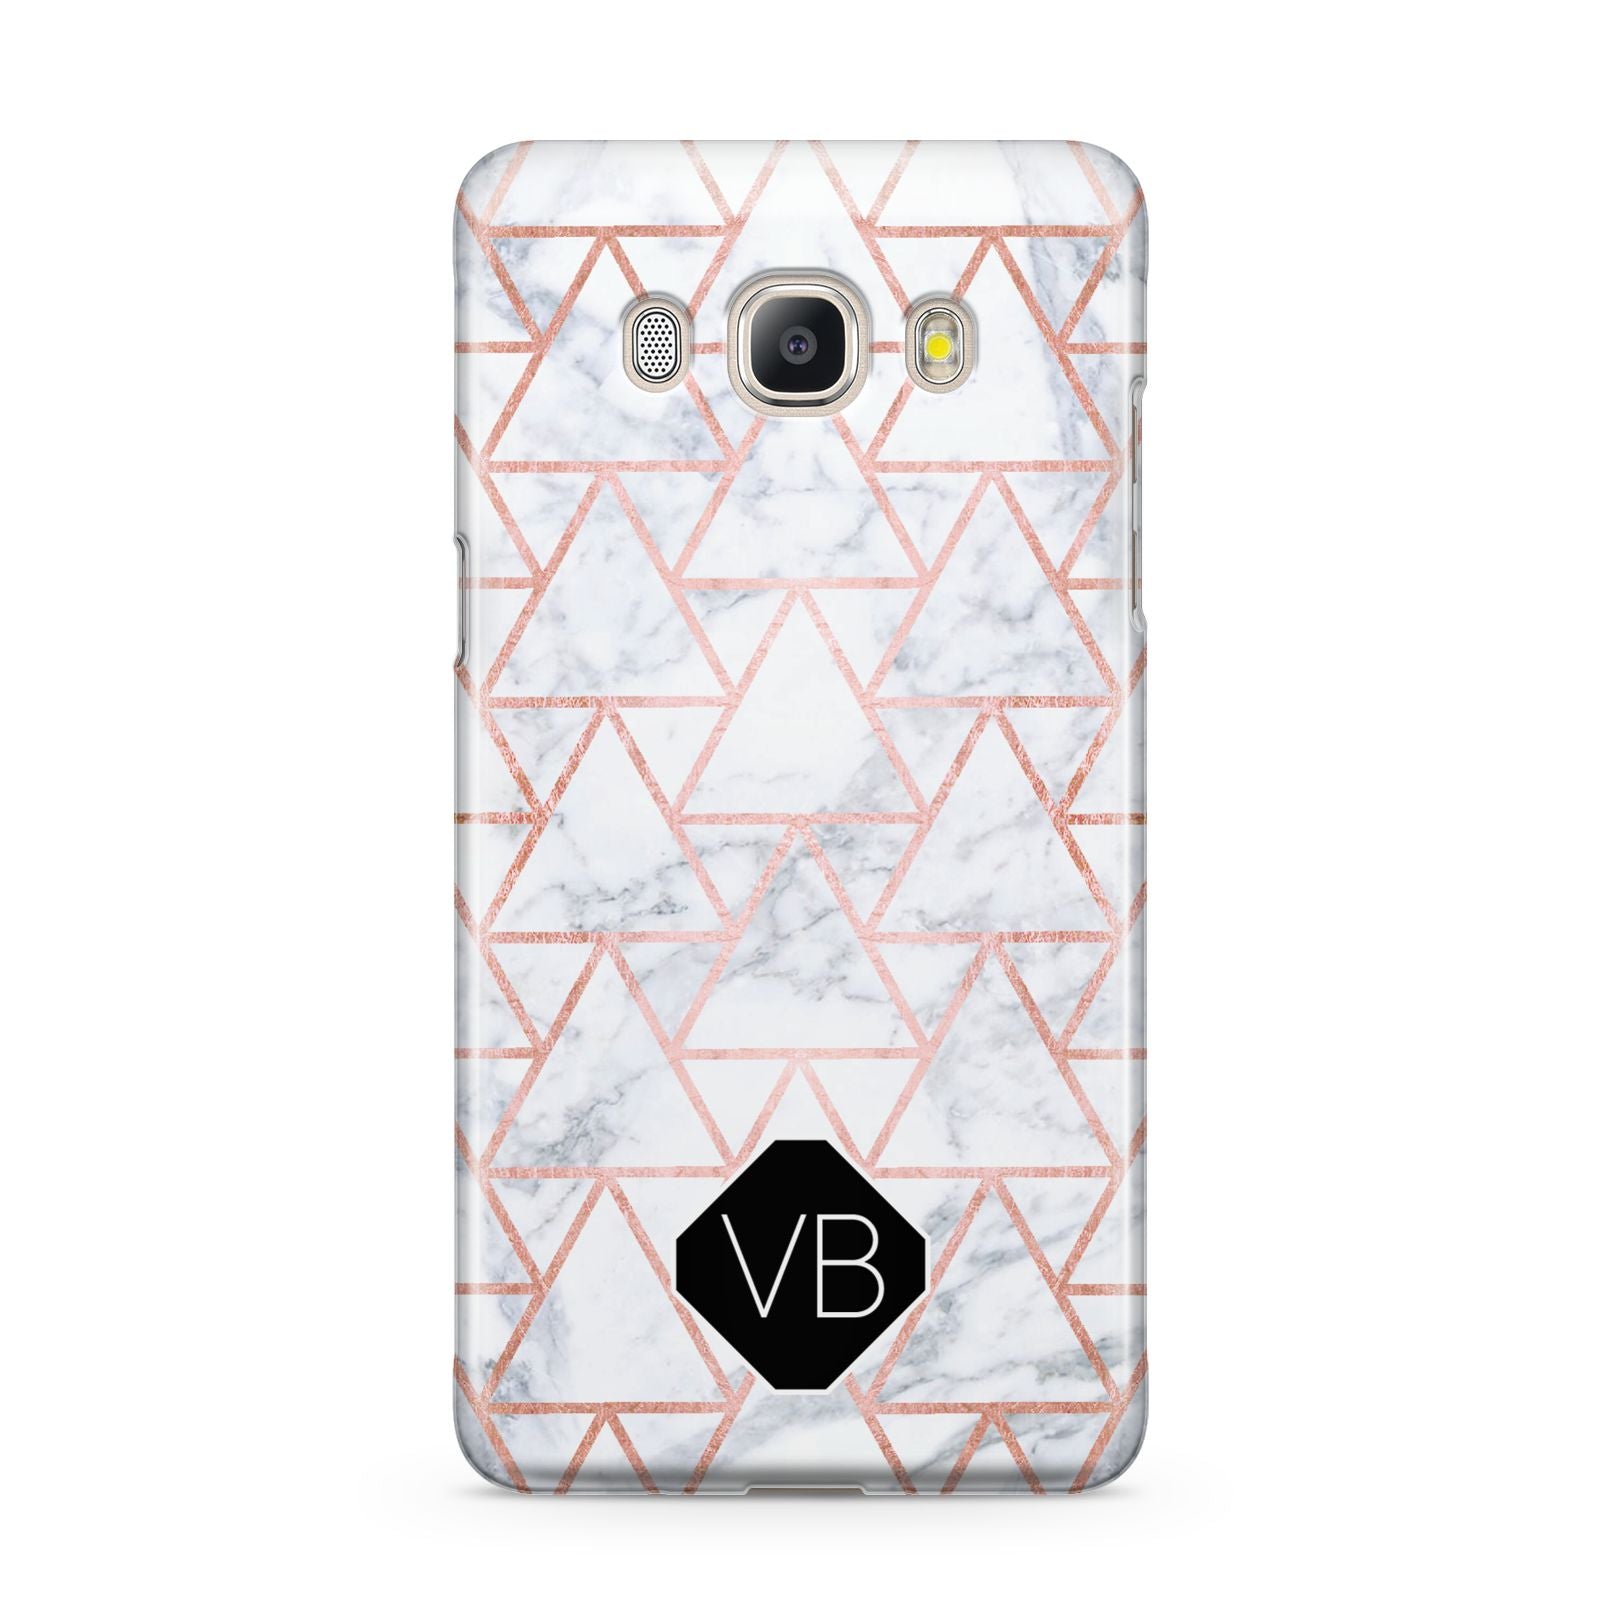 Personalised Rose Gold Grey Marble Hexagon Samsung Galaxy J5 2016 Case